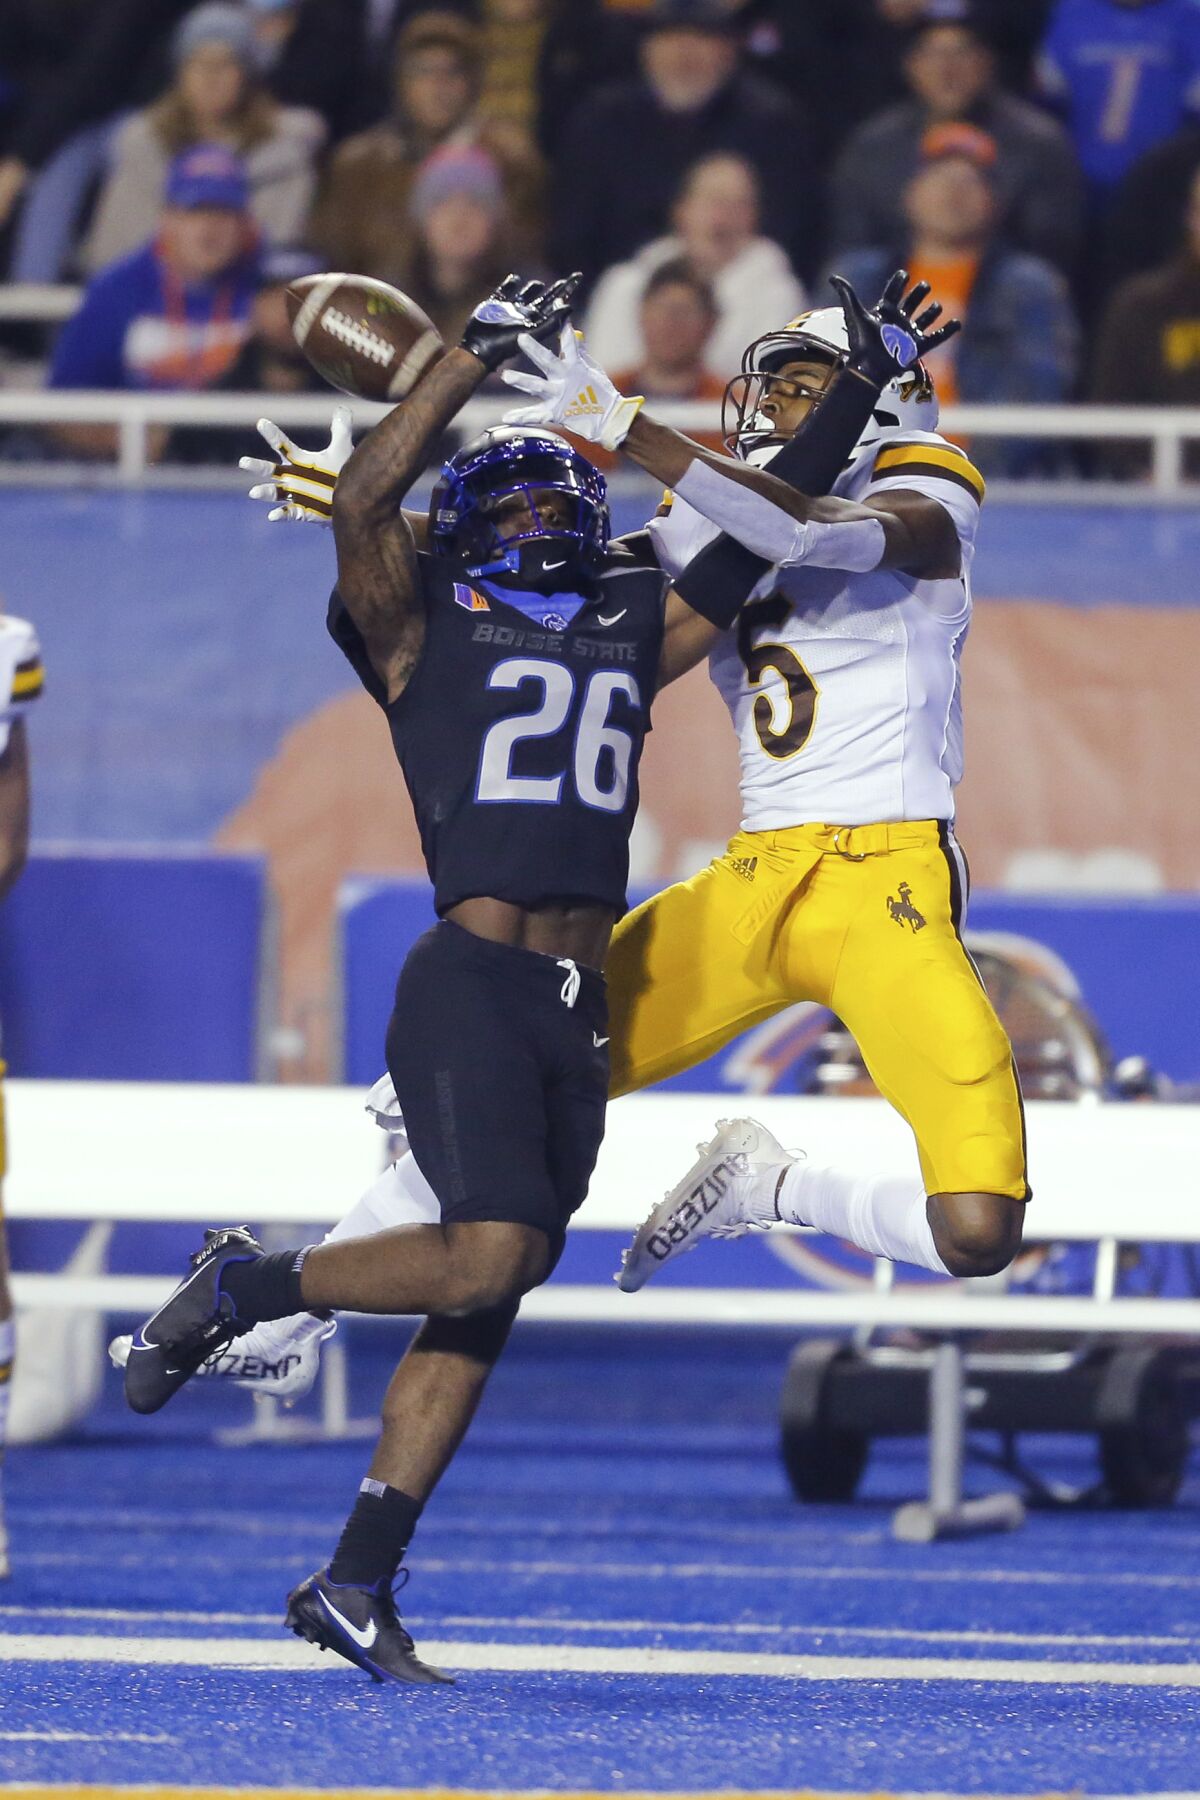 Wyoming wide receiver Isaiah Neyor (5) reaches back for the ball as Boise State cornerback Caleb Biggers (26) defends during the second half of an NCAA college football game Friday, Nov. 12, 2021, in Boise, Idaho. The pass was incomplete. Boise State won 23-13. (AP Photo/Steve Conner)